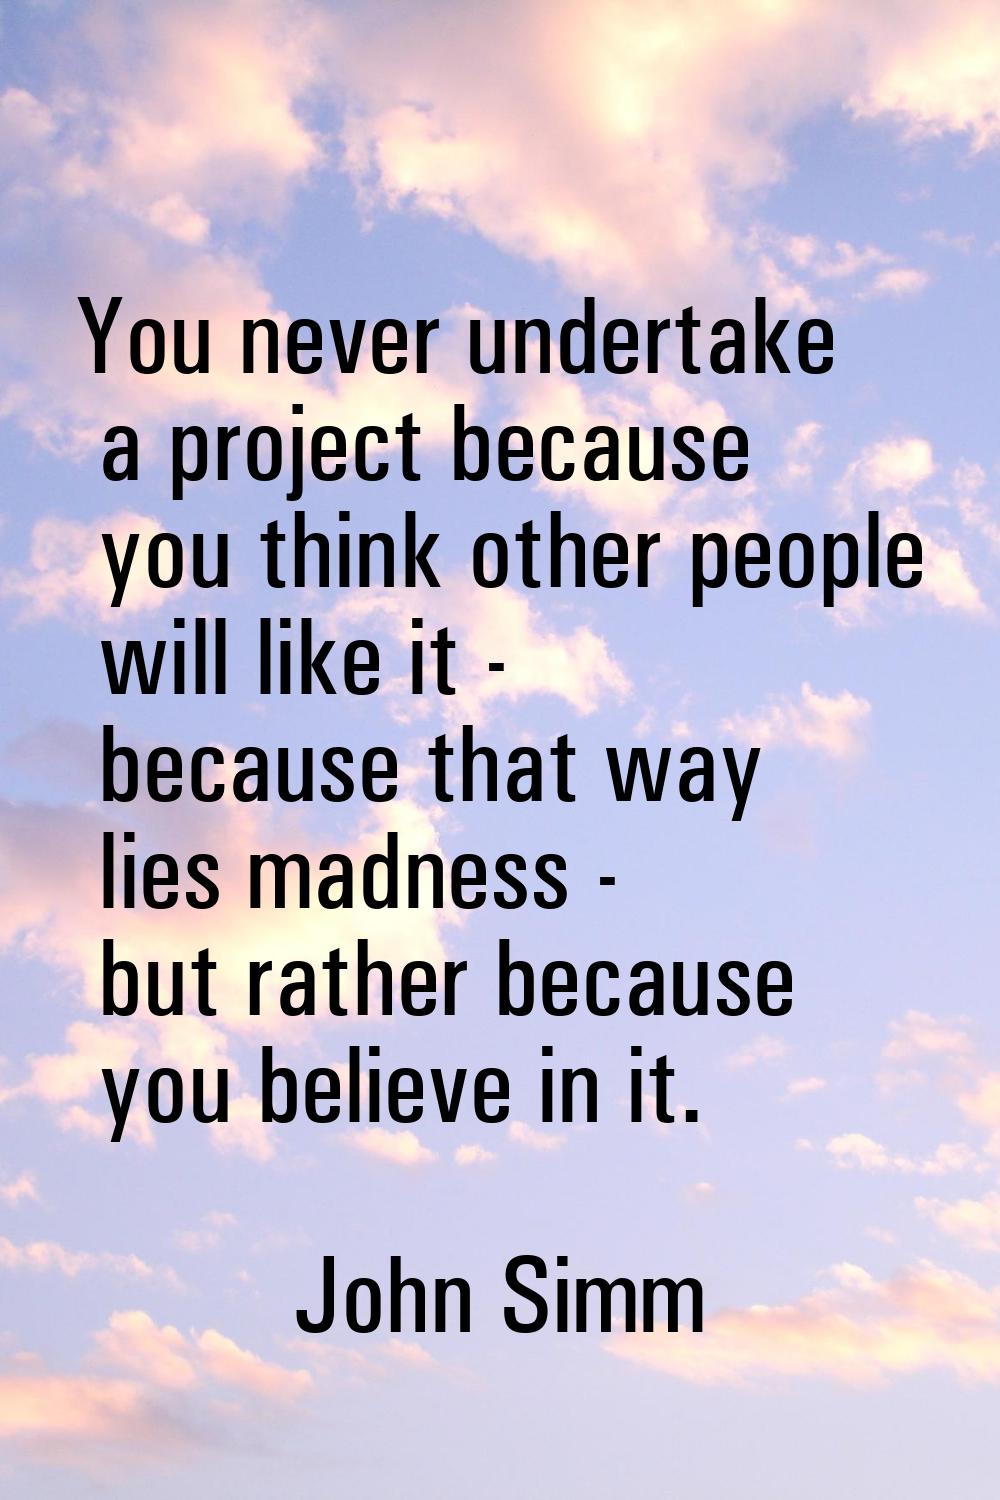 You never undertake a project because you think other people will like it - because that way lies m